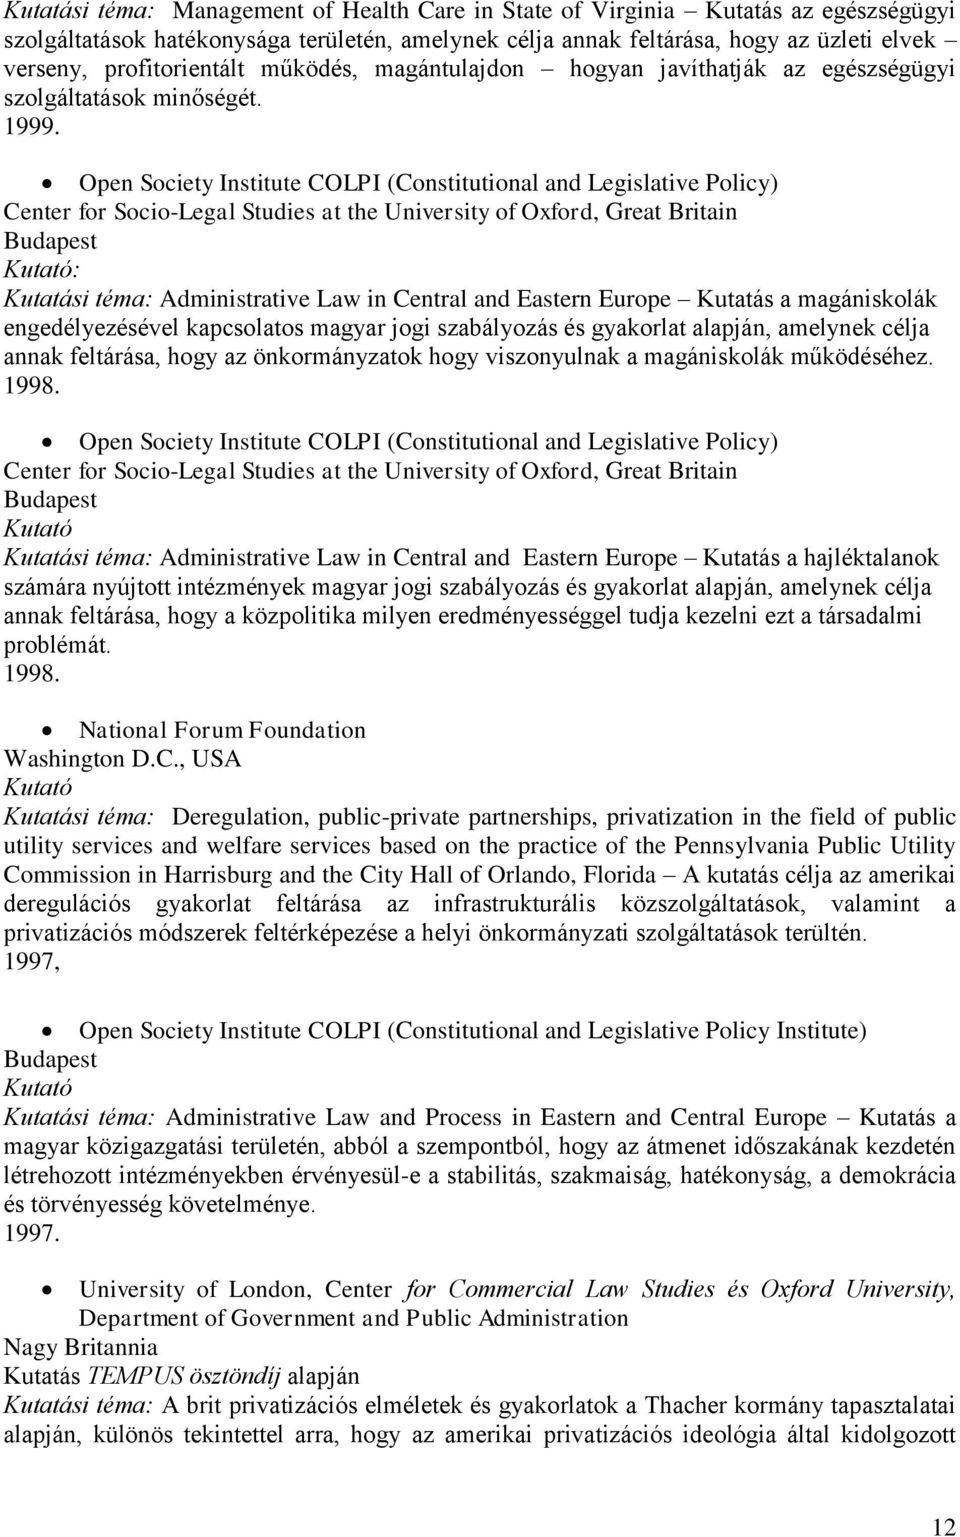 Open Society Institute COLPI (Constitutional and Legislative Policy) Center for Socio-Legal Studies at the University of Oxford, Great Britain Kutató: Kutatási téma: Administrative Law in Central and